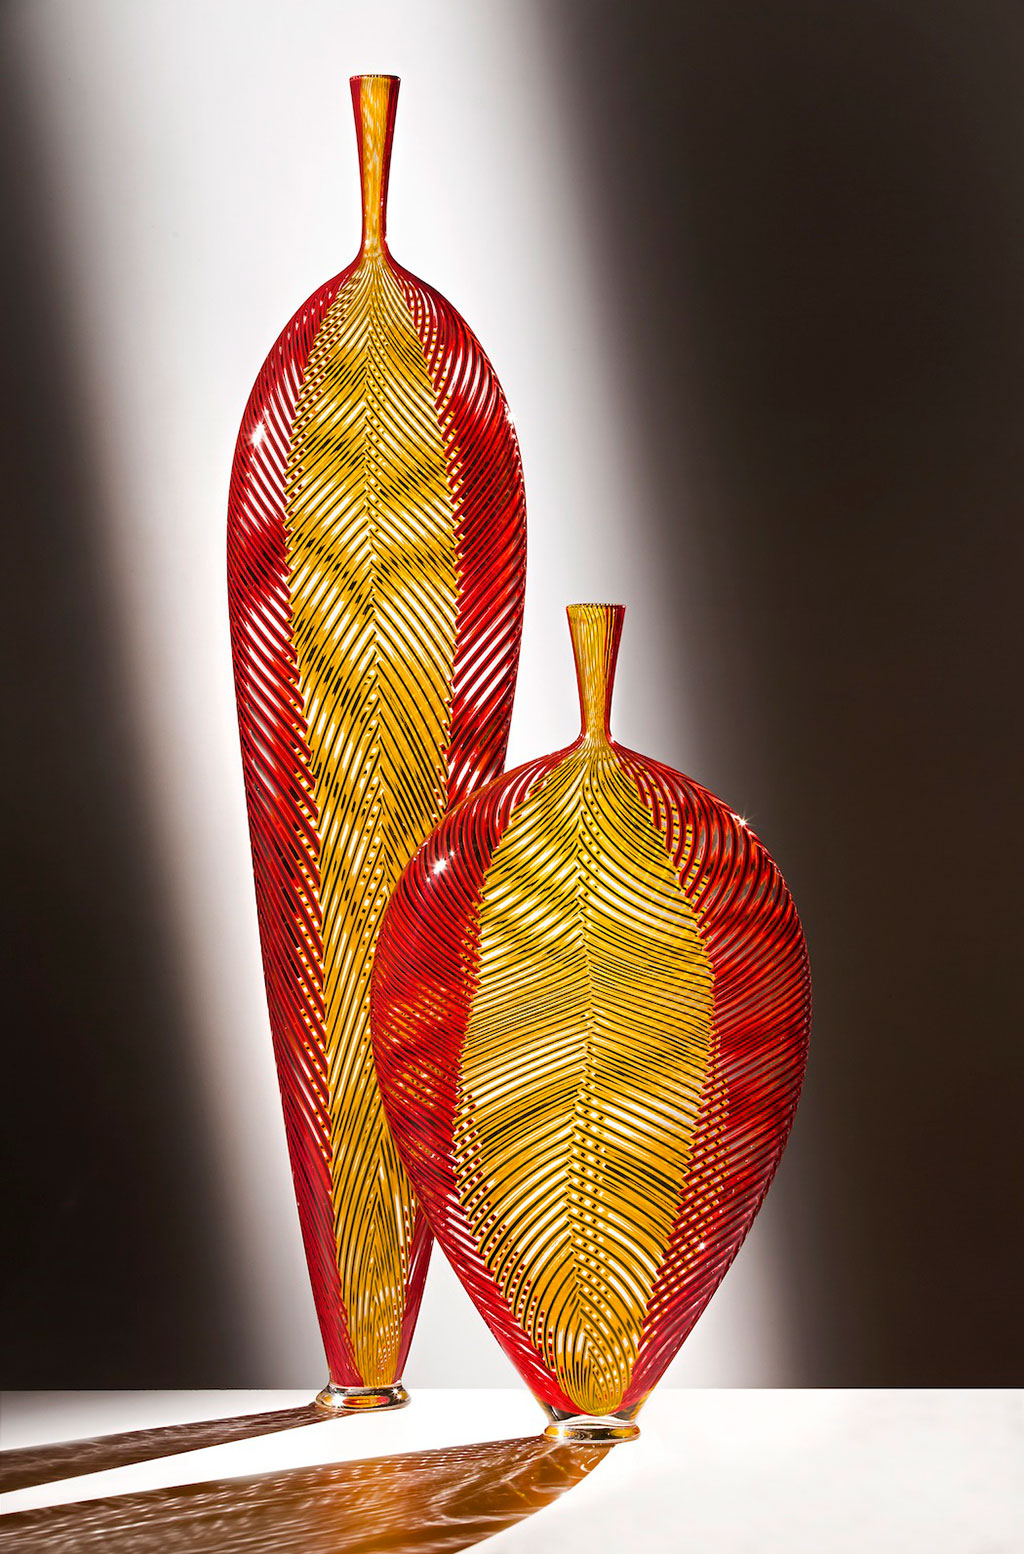 Dante Marioni, Yellow in Red Leaf Installation. Russell Johnson photograph